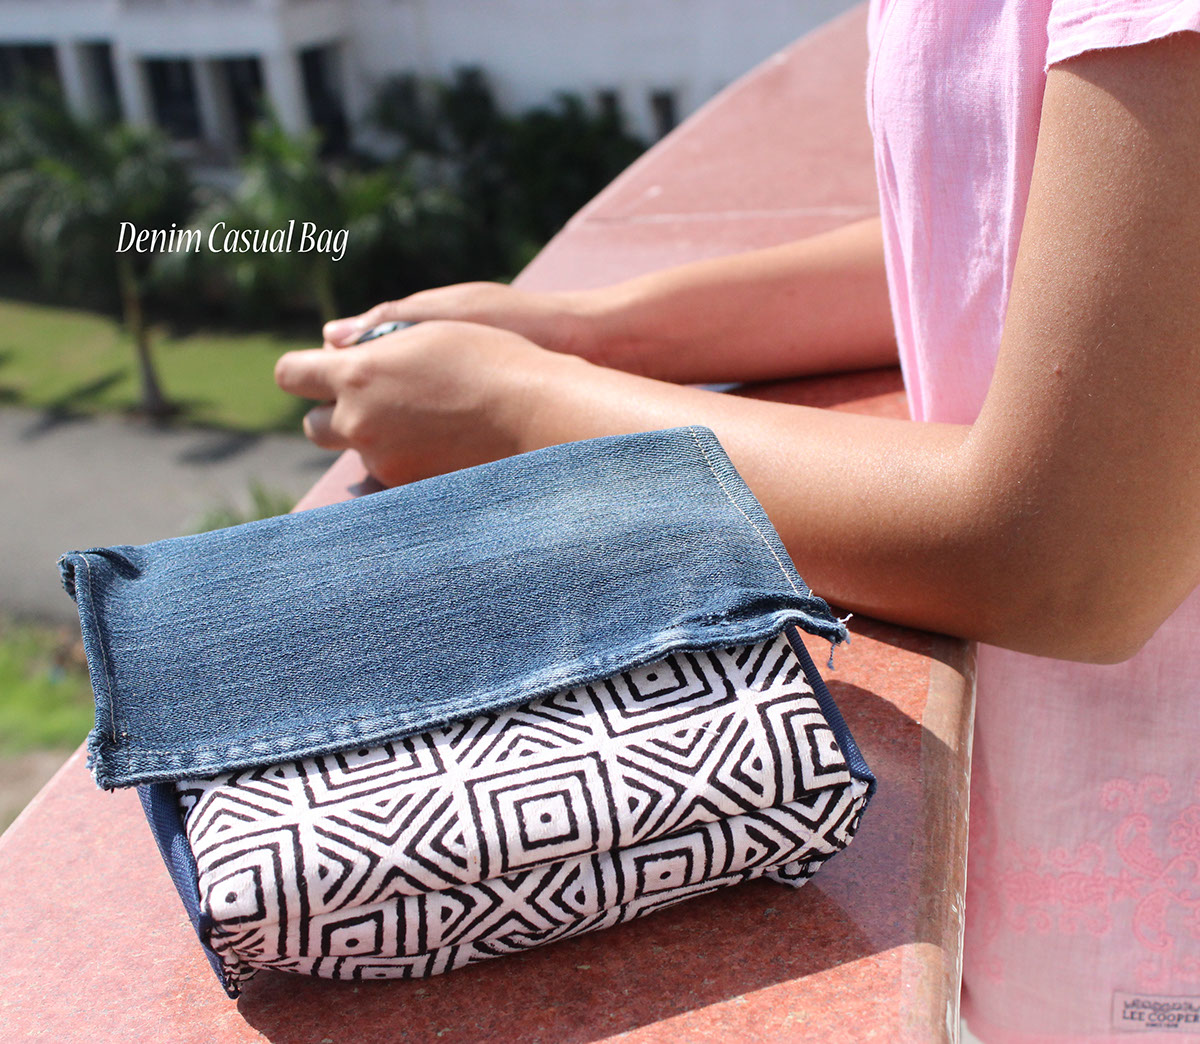 Denim stitching sewing bags wallets sleeves